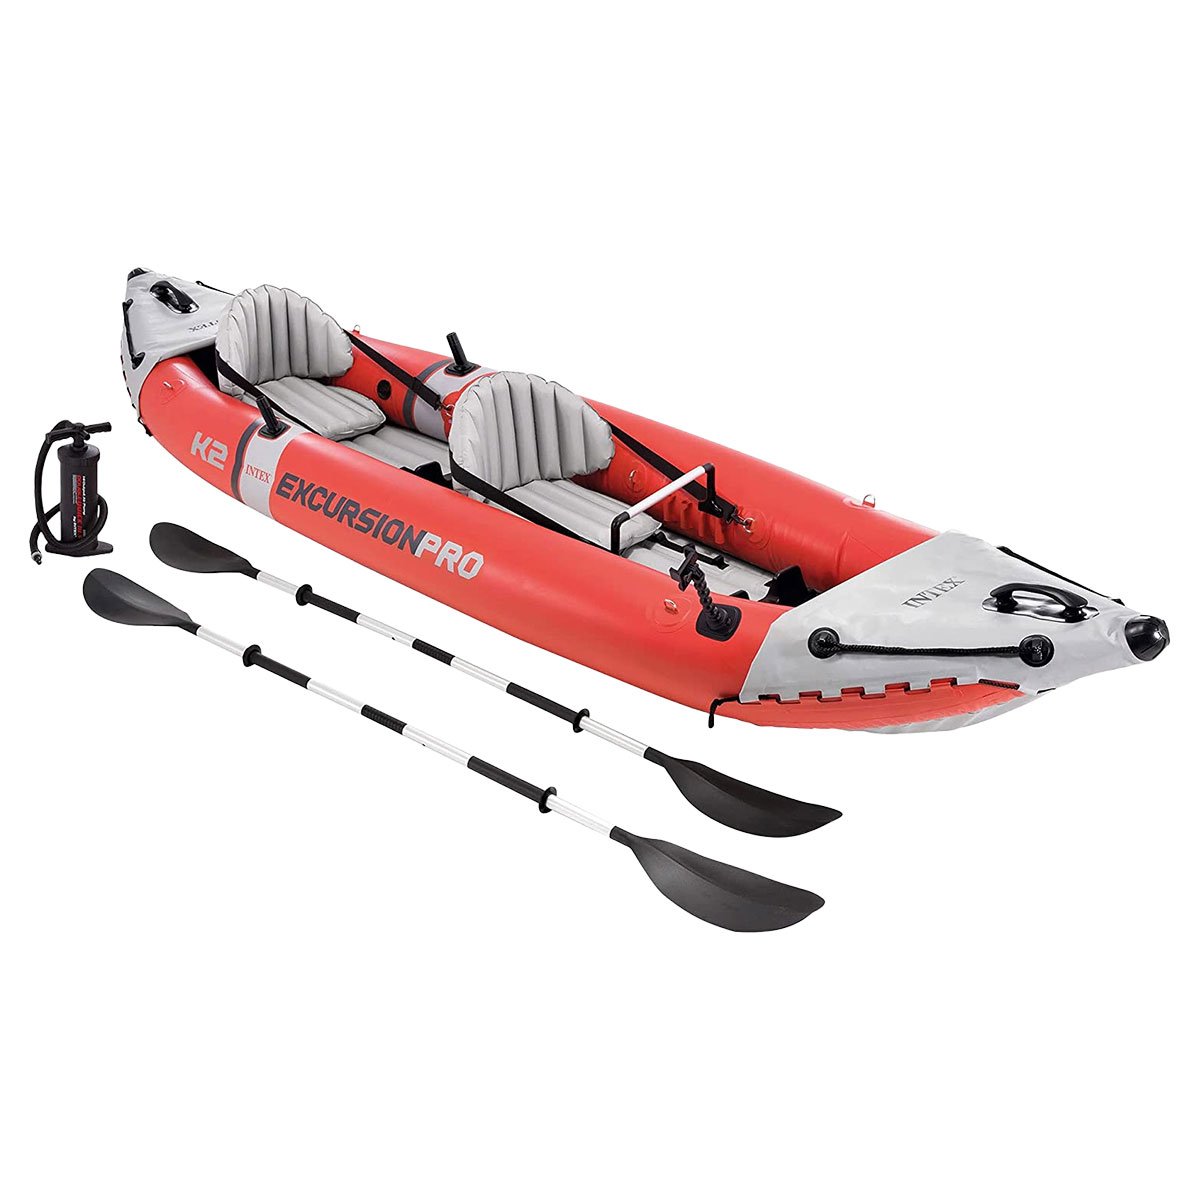 Intex 68309NP Excursion Pro K2 2-Seater Inflatable Kayak with Paddles 2